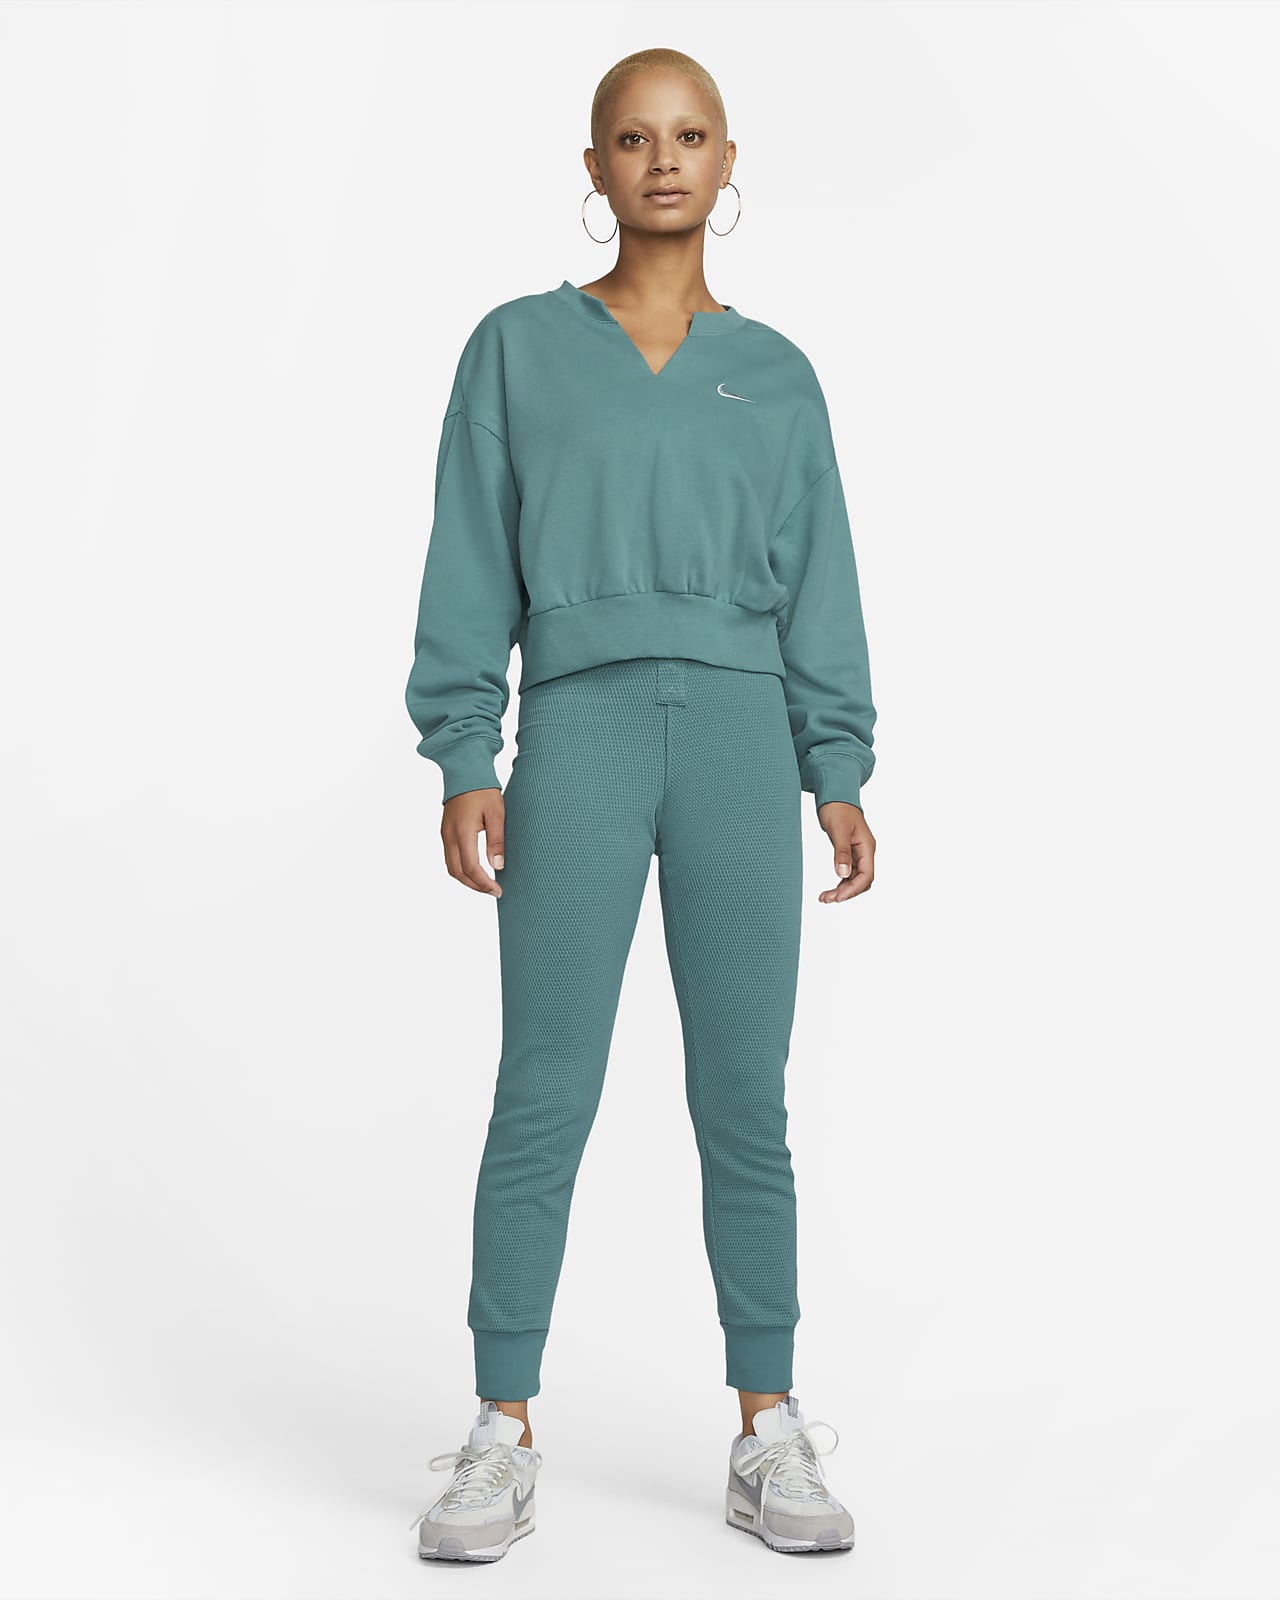 https://static.nike.com/a/images/t_PDP_1280_v1/f_auto,q_auto:eco/5fb9a4c5-0ffb-4d91-9ade-3d286ffa0a8f/sportswear-everyday-modern-oversized-crop-french-terry-crew-neck-sweatshirt-qV9m3J.png